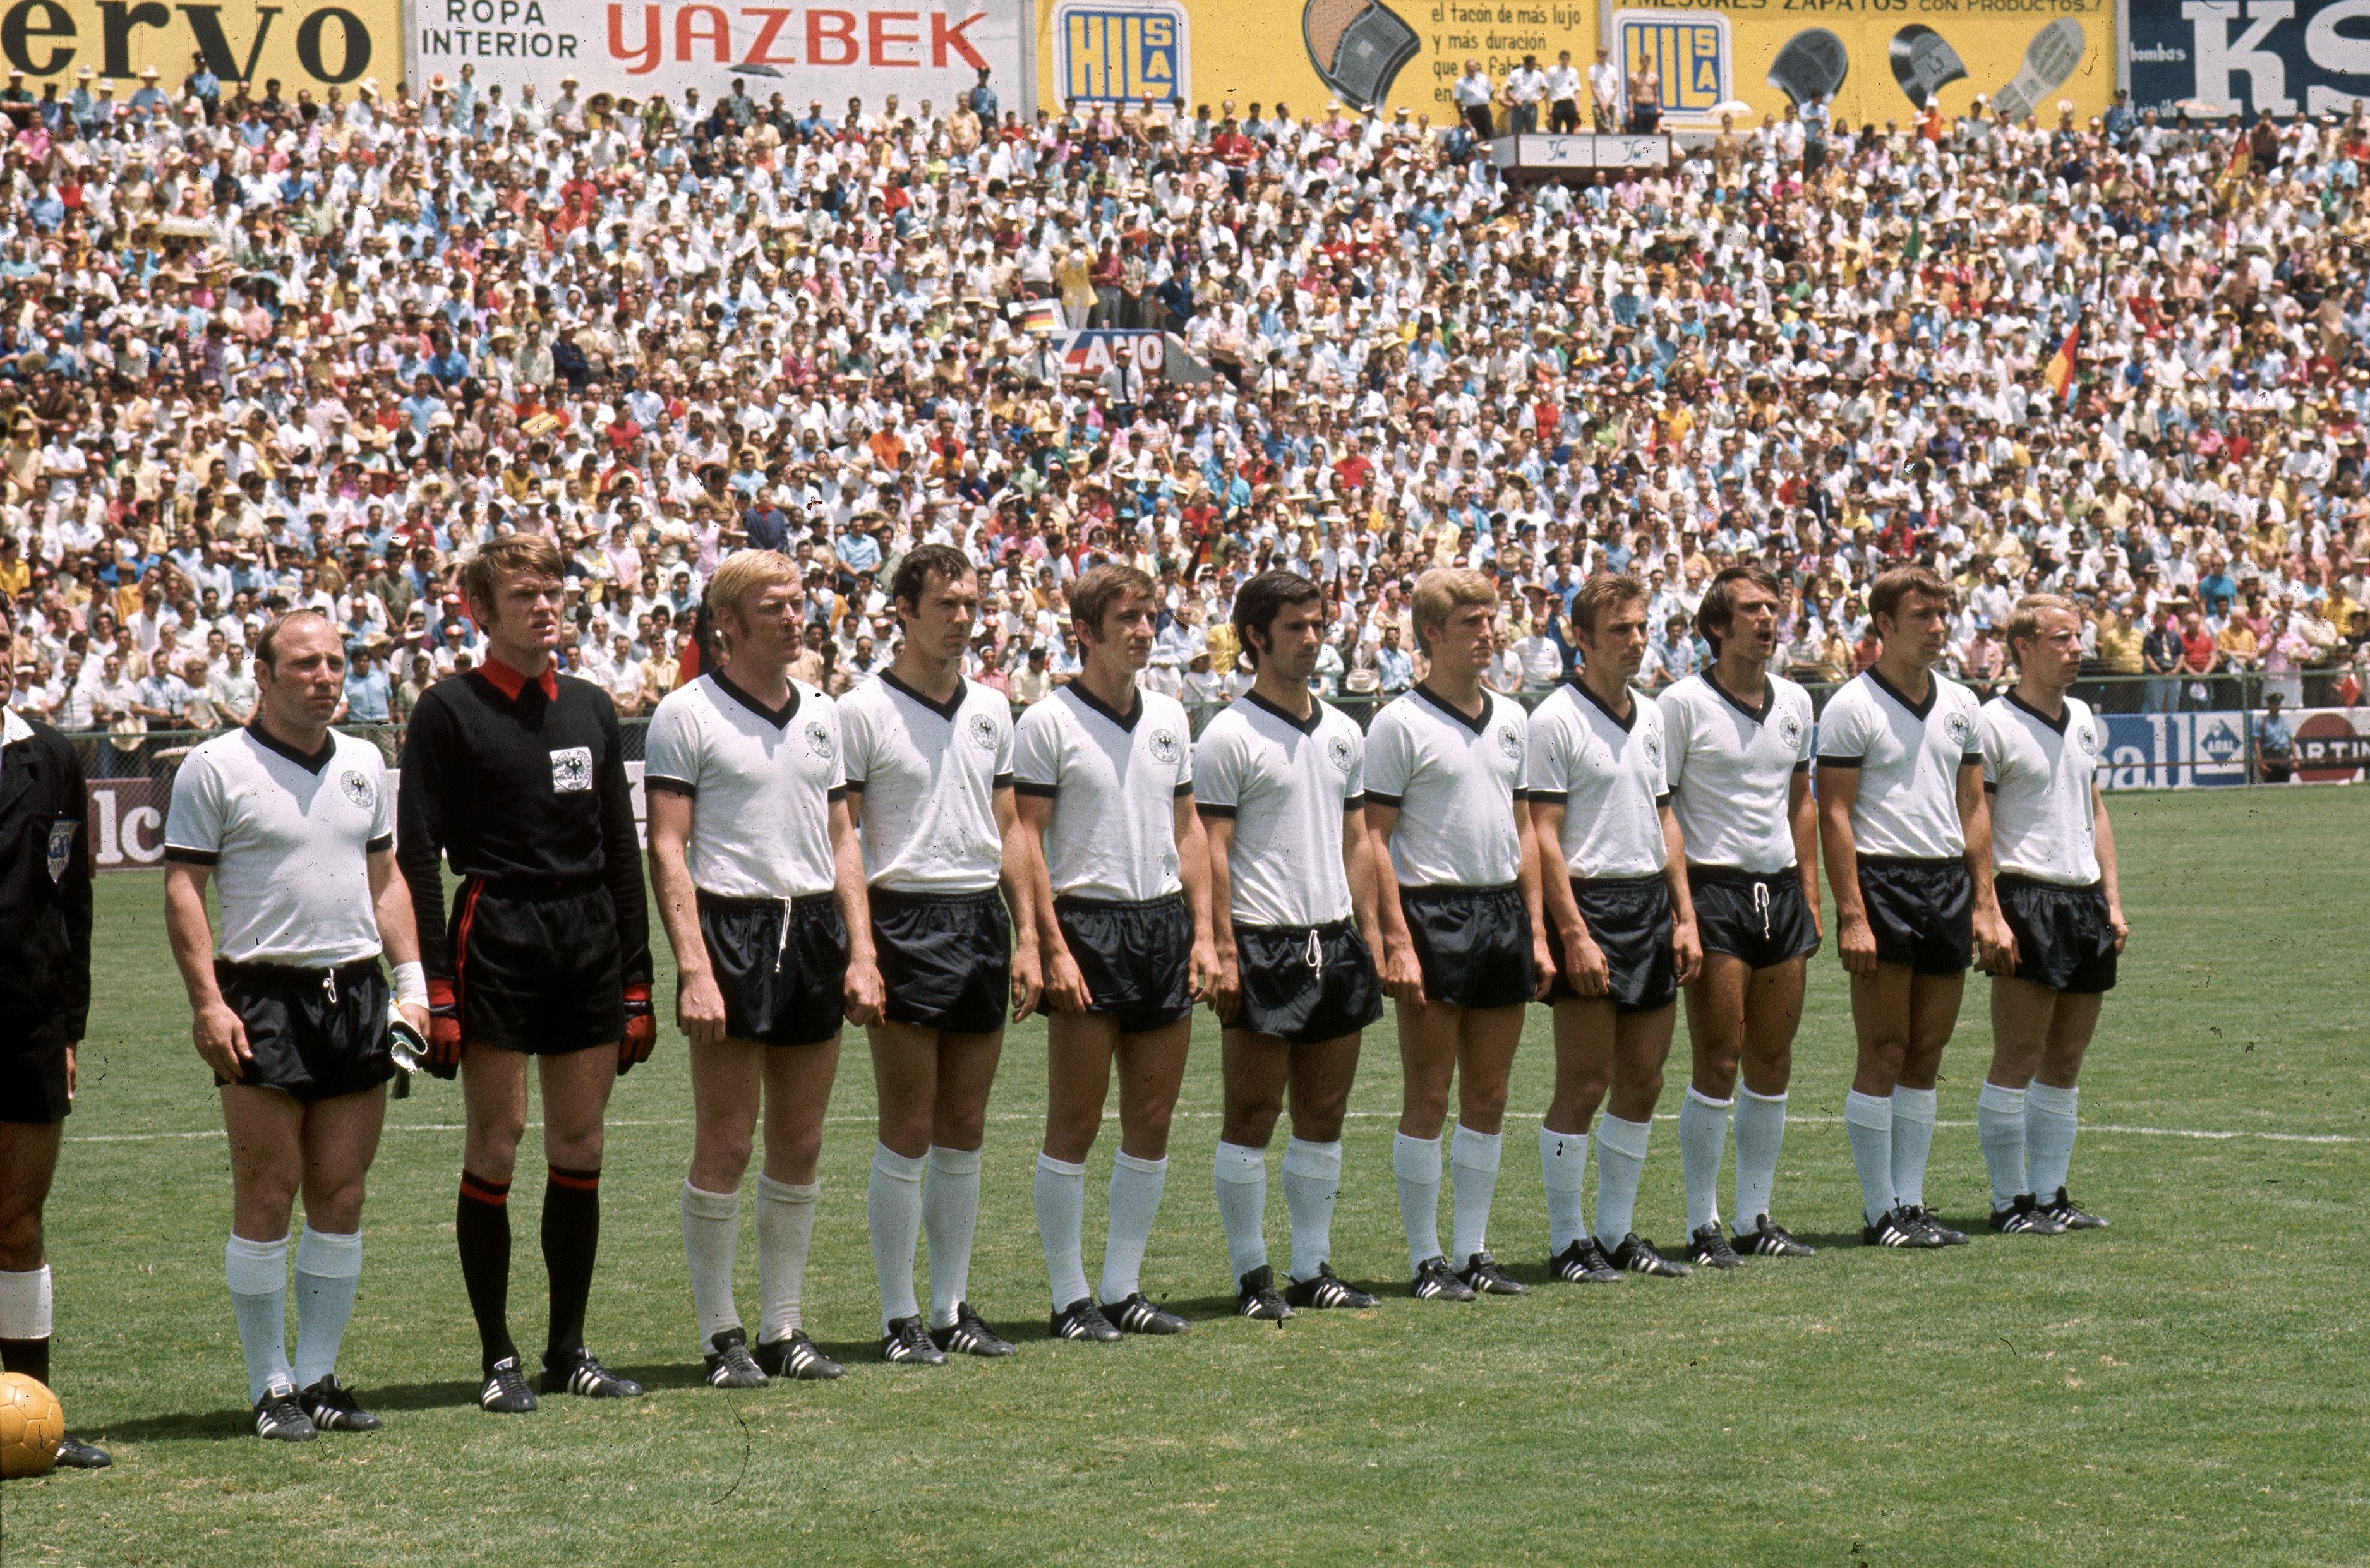 Muller lines up as part of the 1970 West Germany team.